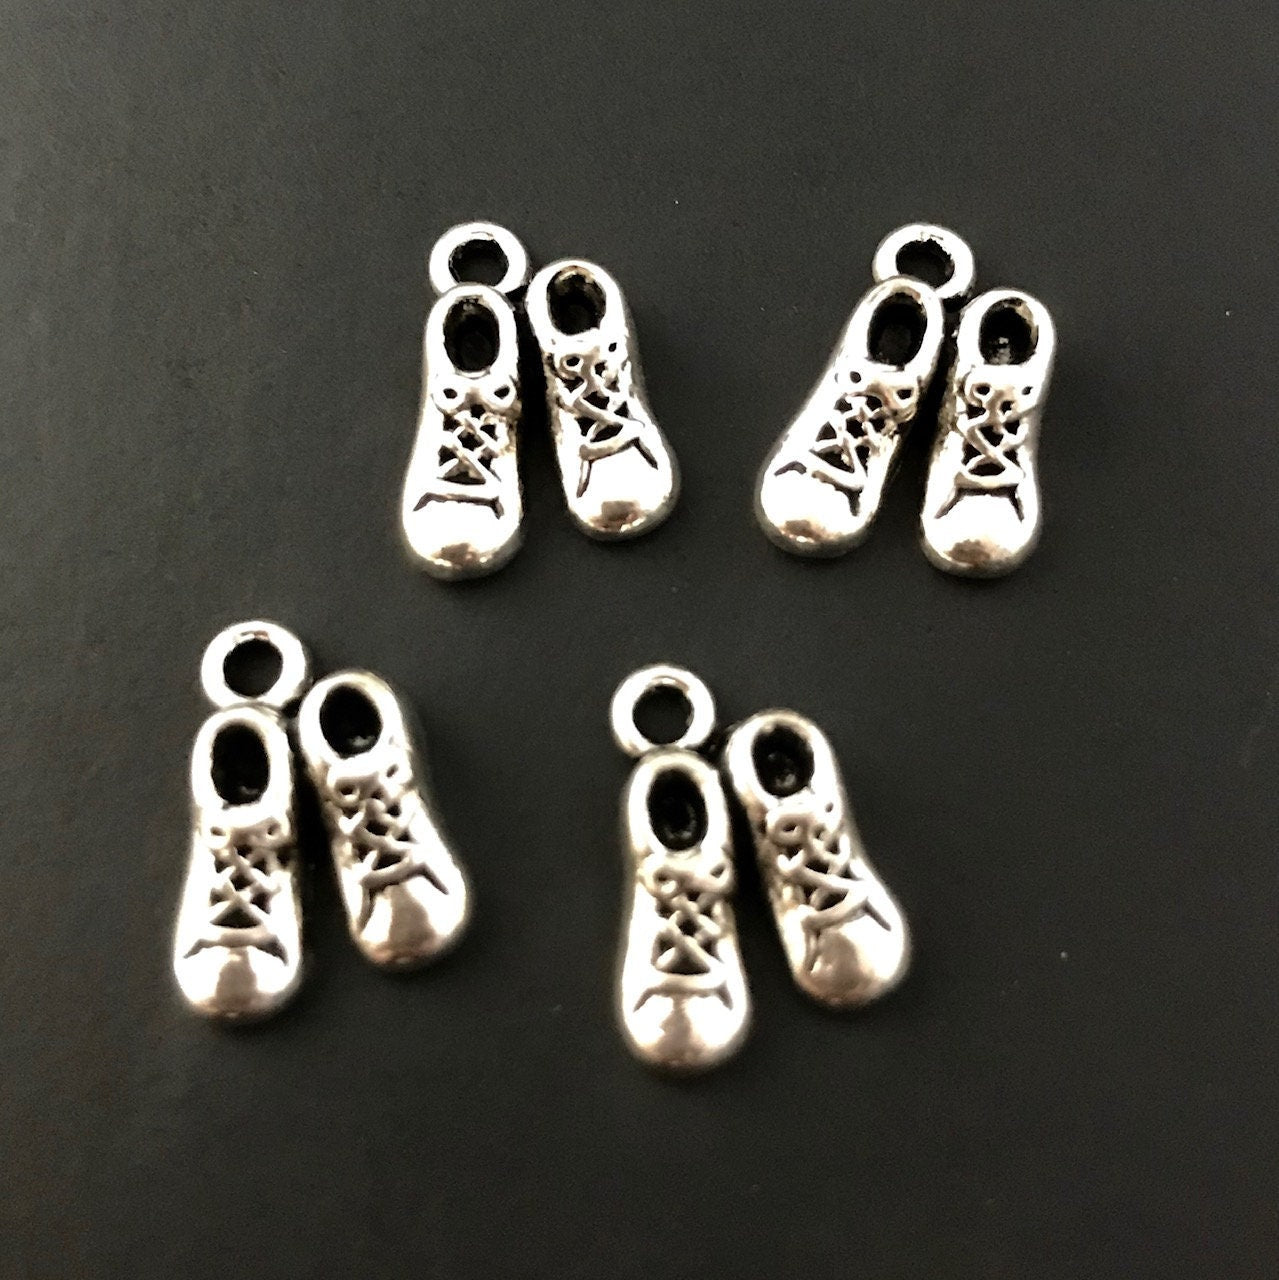 6 Baby Shoe Charms - 3D - Antique Silver